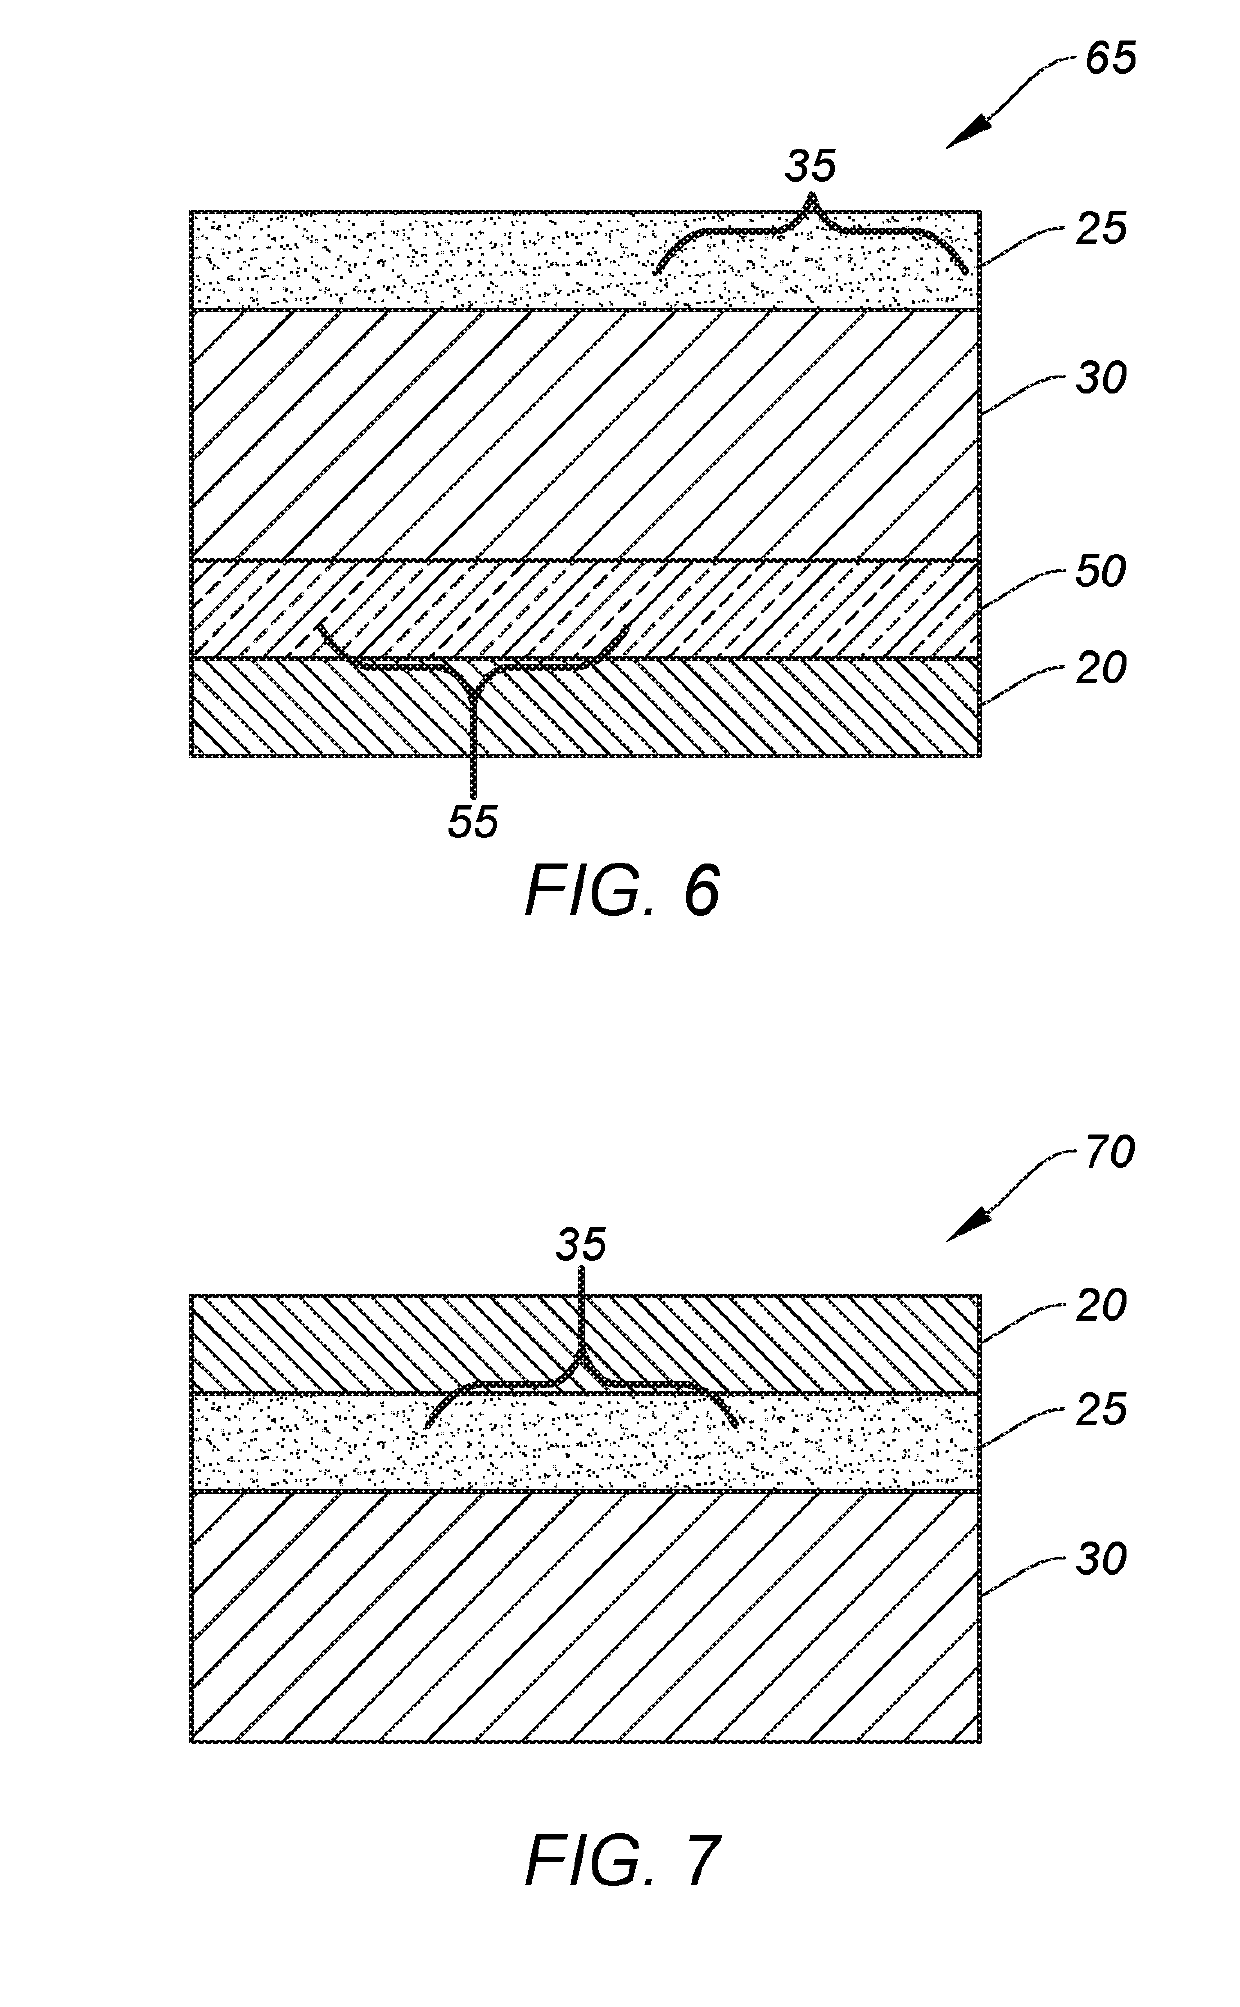 Piezoelectric capacitor with co-planar patterned electrodes